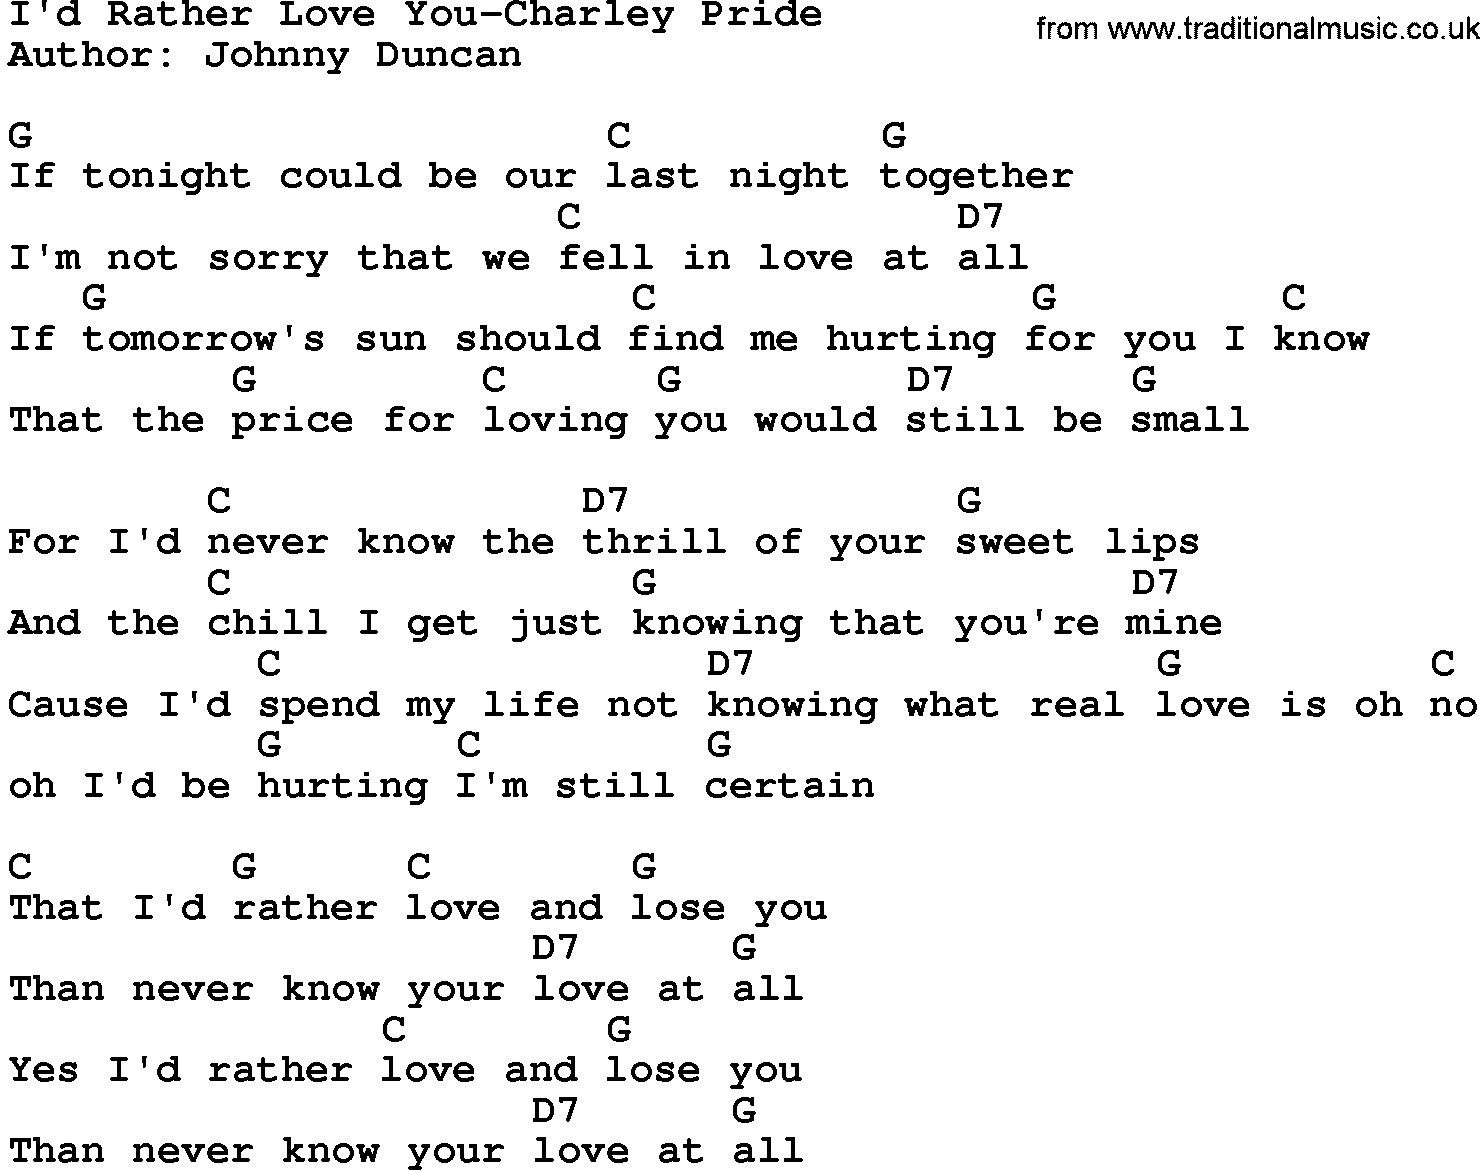 Country music song: I'd Rather Love You-Charley Pride lyrics and chords